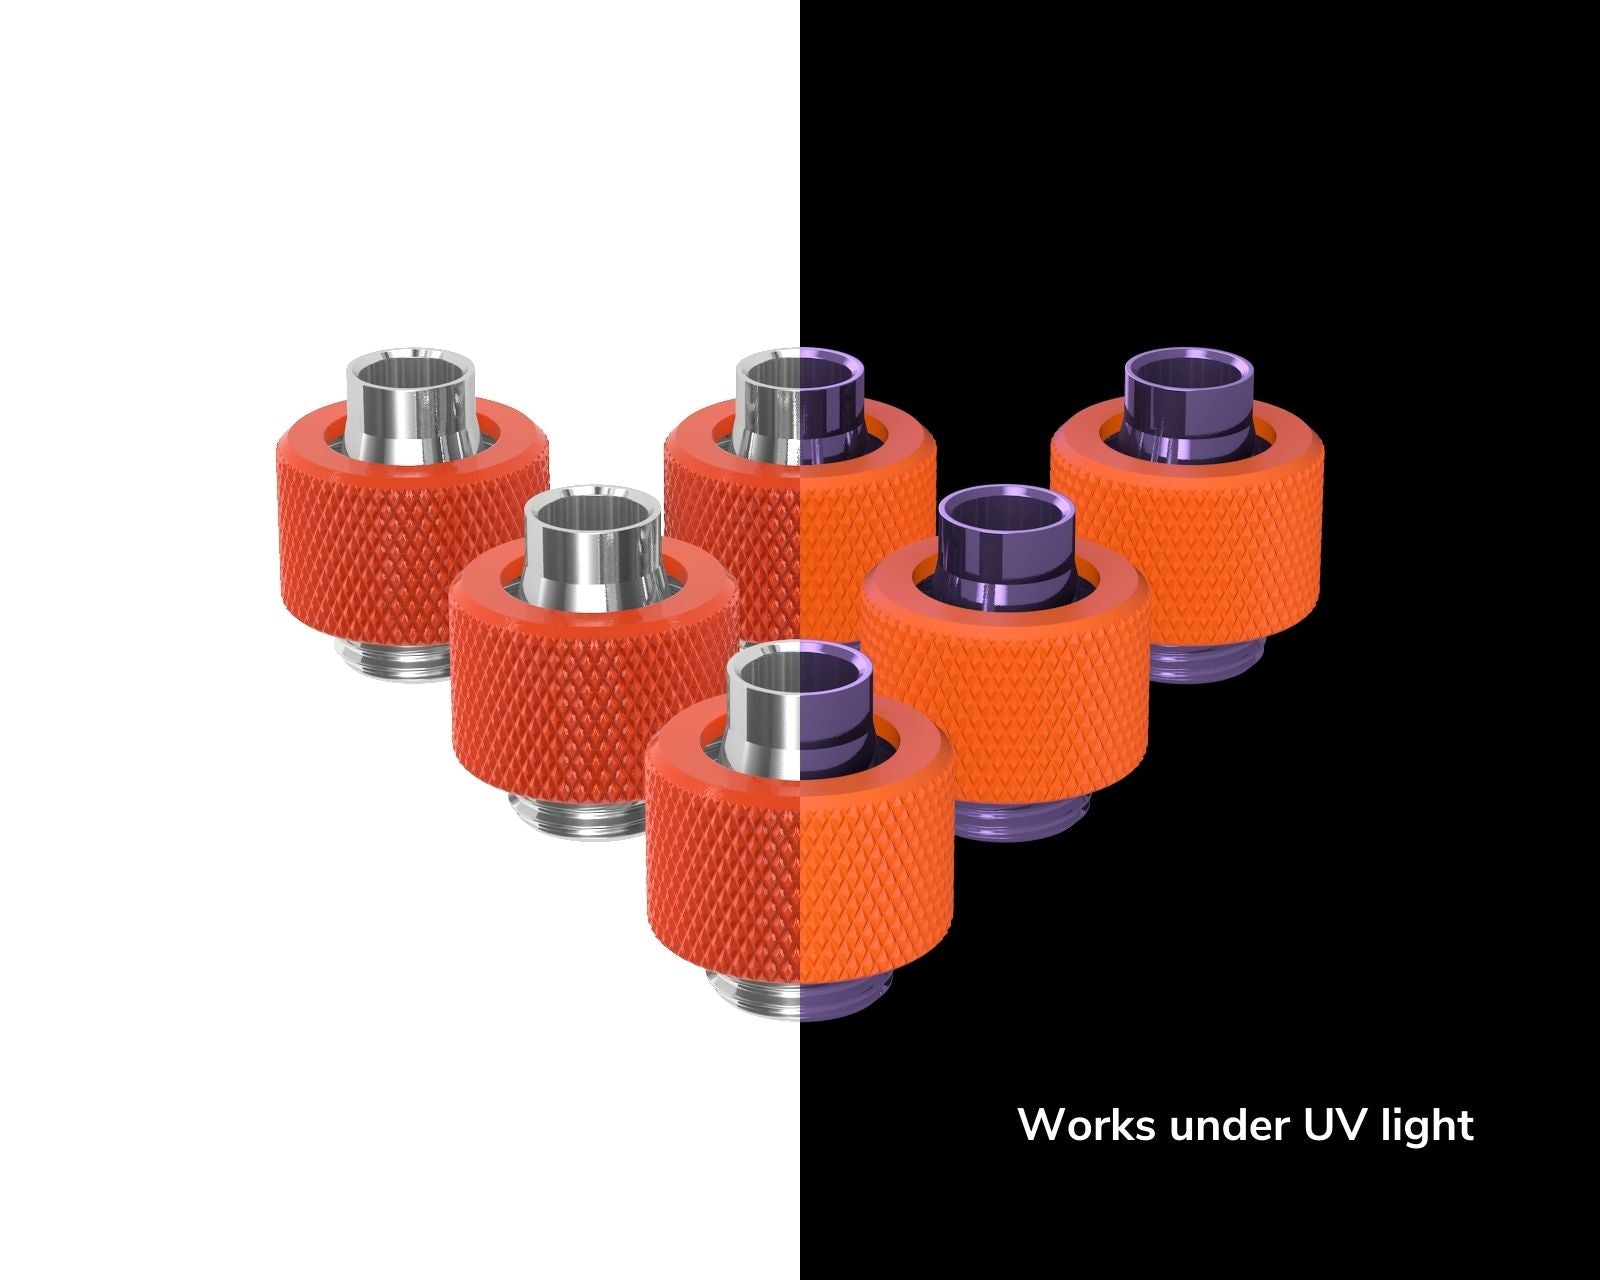 PrimoChill SecureFit SX - Premium Compression Fitting For 3/8in ID x 1/2in OD Flexible Tubing 6 Pack (F-SFSX12-6) - Available in 20+ Colors, Custom Watercooling Loop Ready - UV Orange